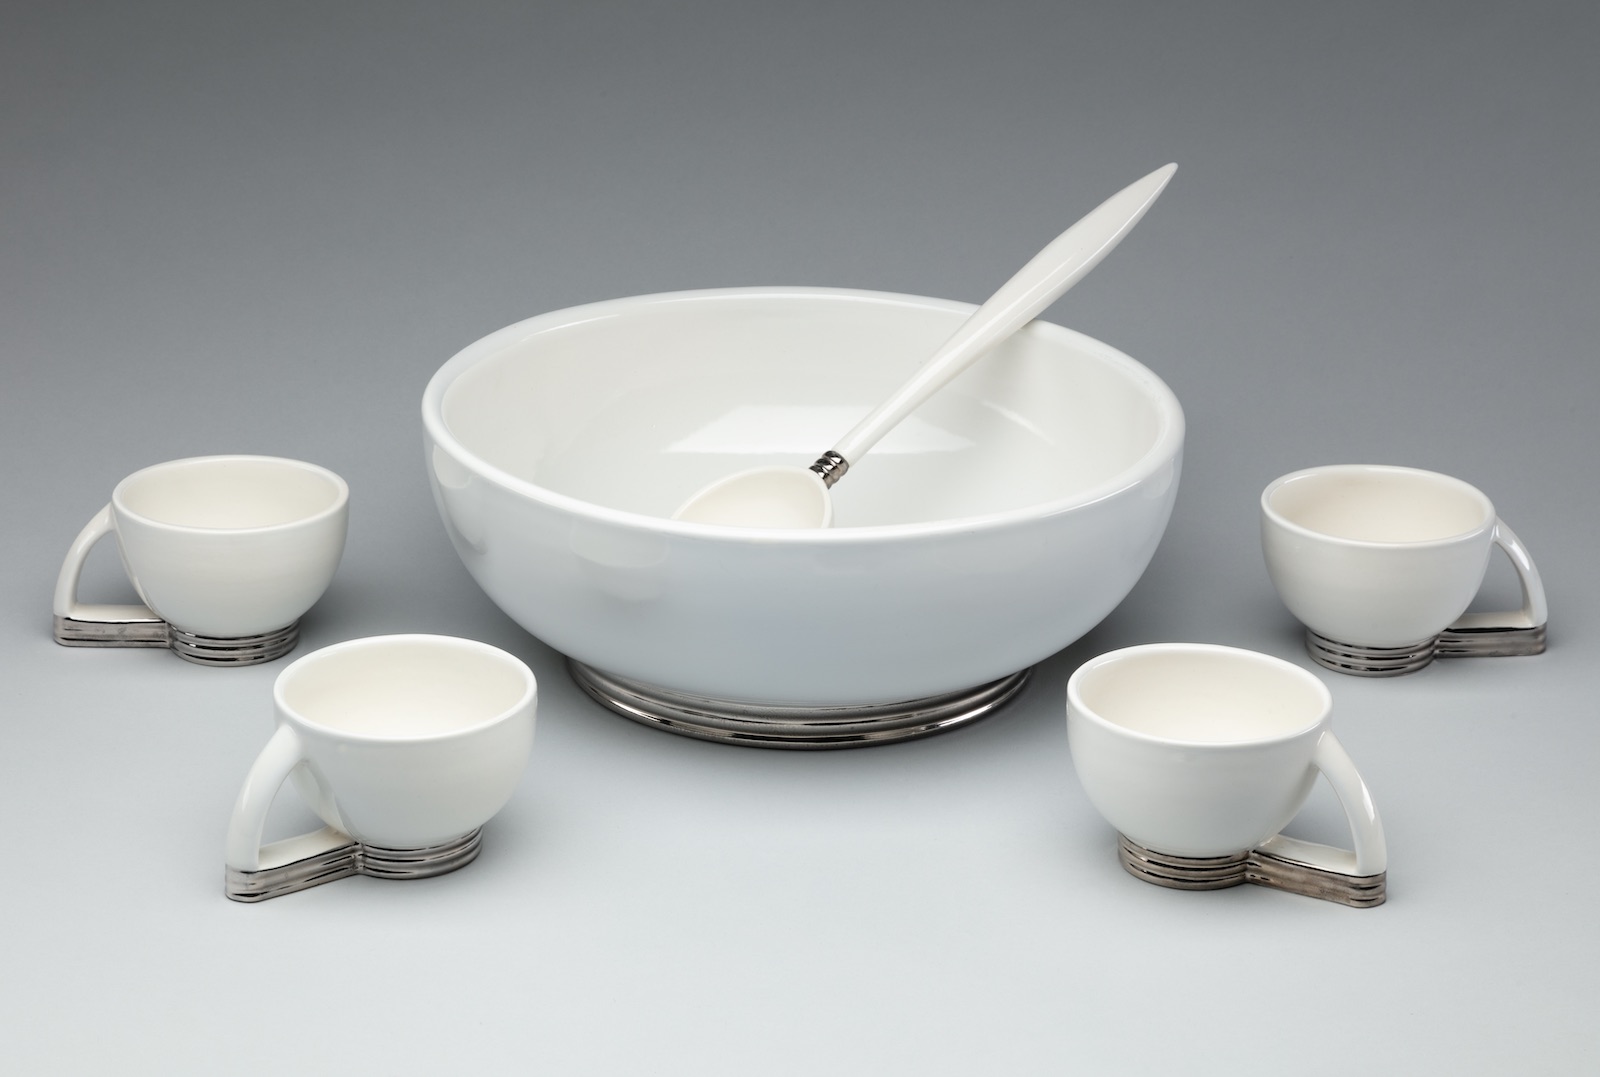 White ceramic bowl sits atop a silver bottom. The long-handled ladle rests on the bowl’s rim.  Small white cups with matching silver bottoms surround the bowl.